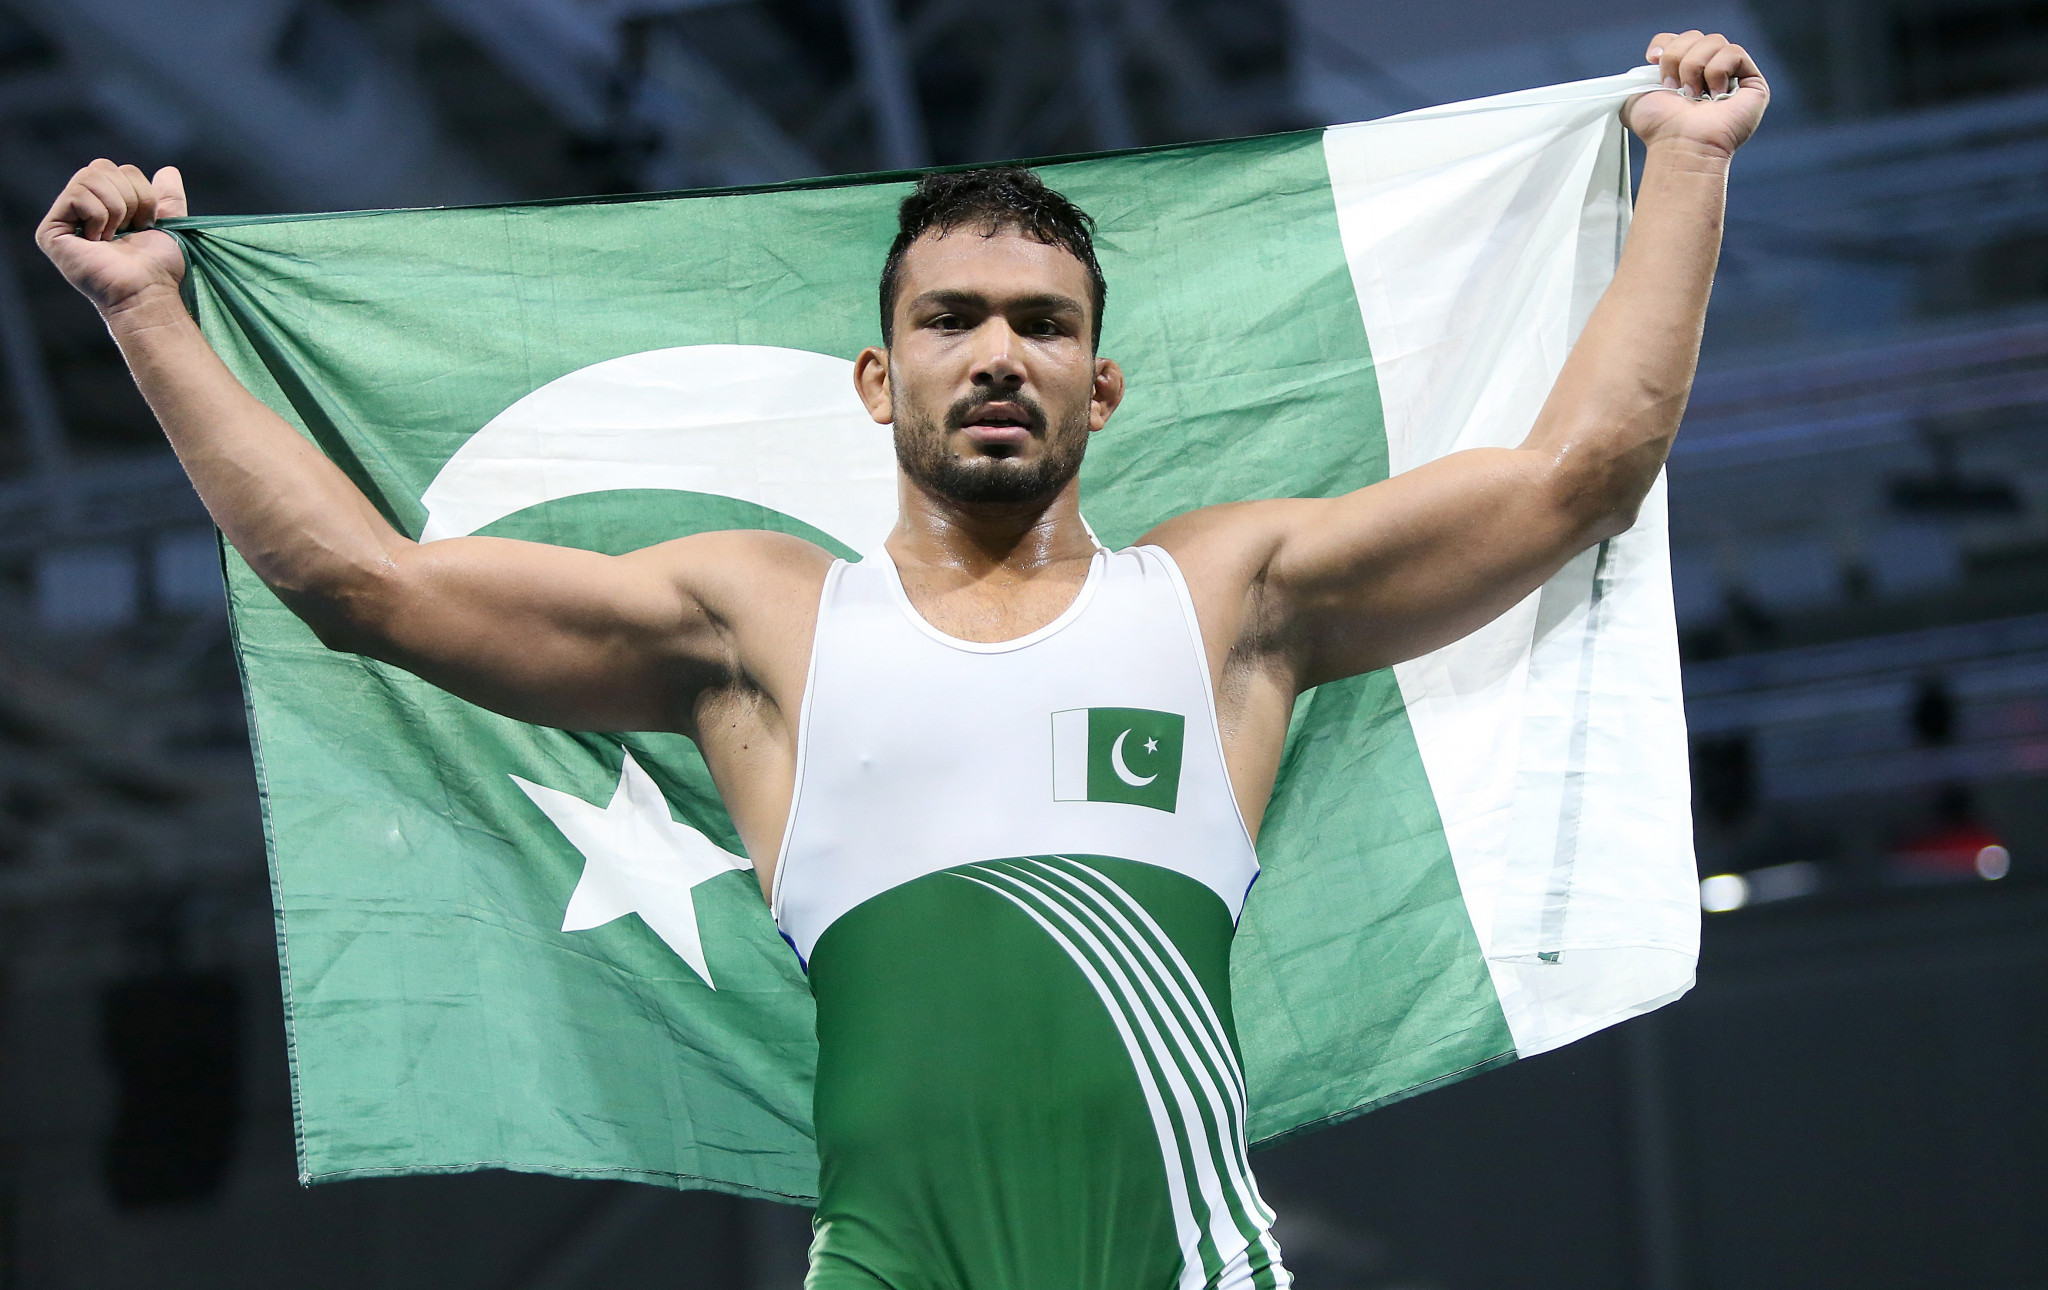 Wrestler Muhammad Inam, who won Pakistan's only gold at Gold Coast 2018, is set to represent his country at Birmingham 2022 ©Getty Images